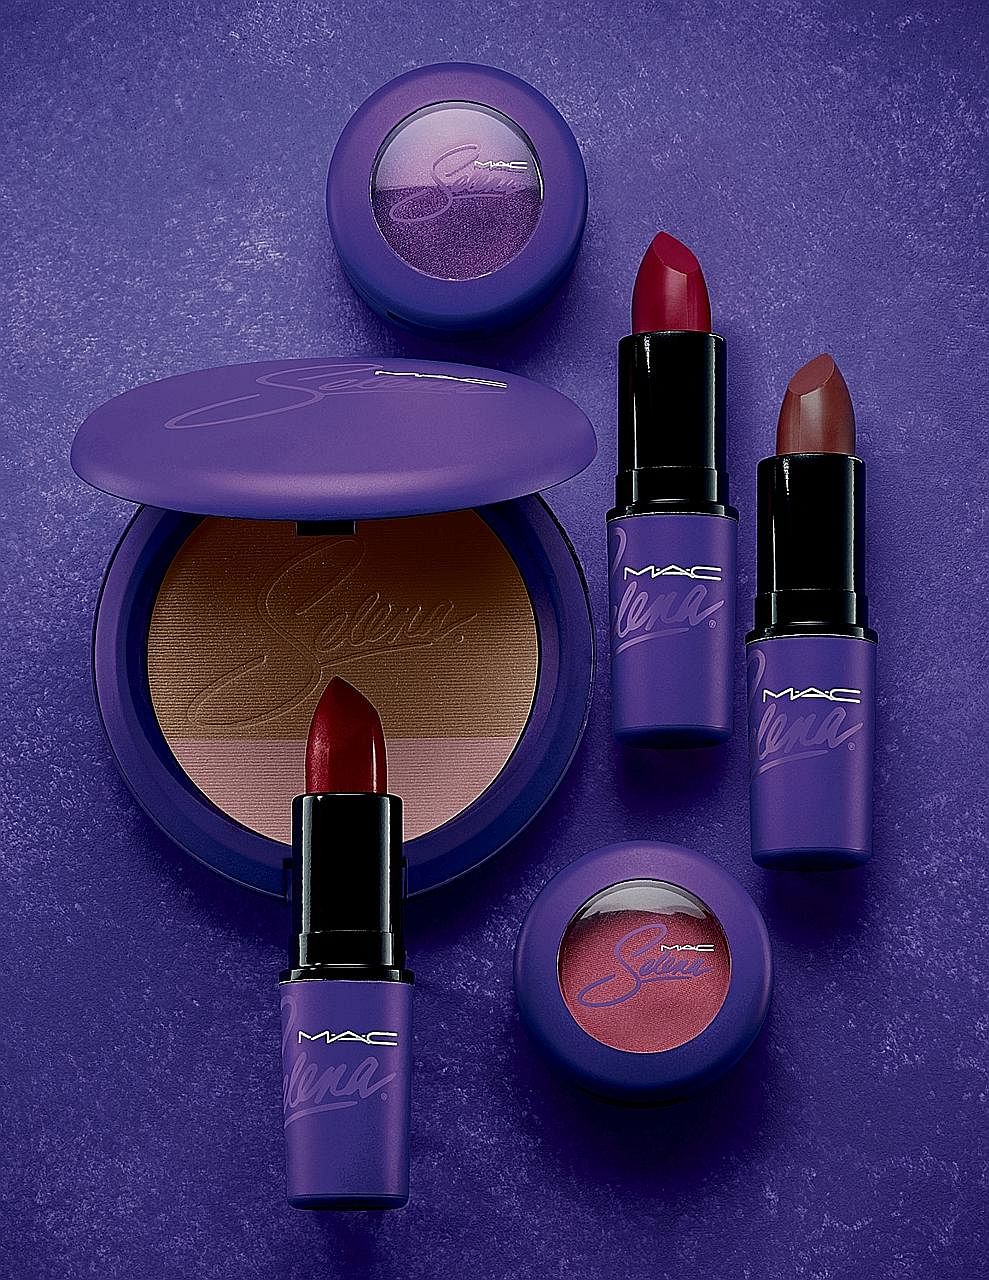 Items from the M.A.C Selena make-up collection, inspired by the late singer Selena Quintanilla Perez.